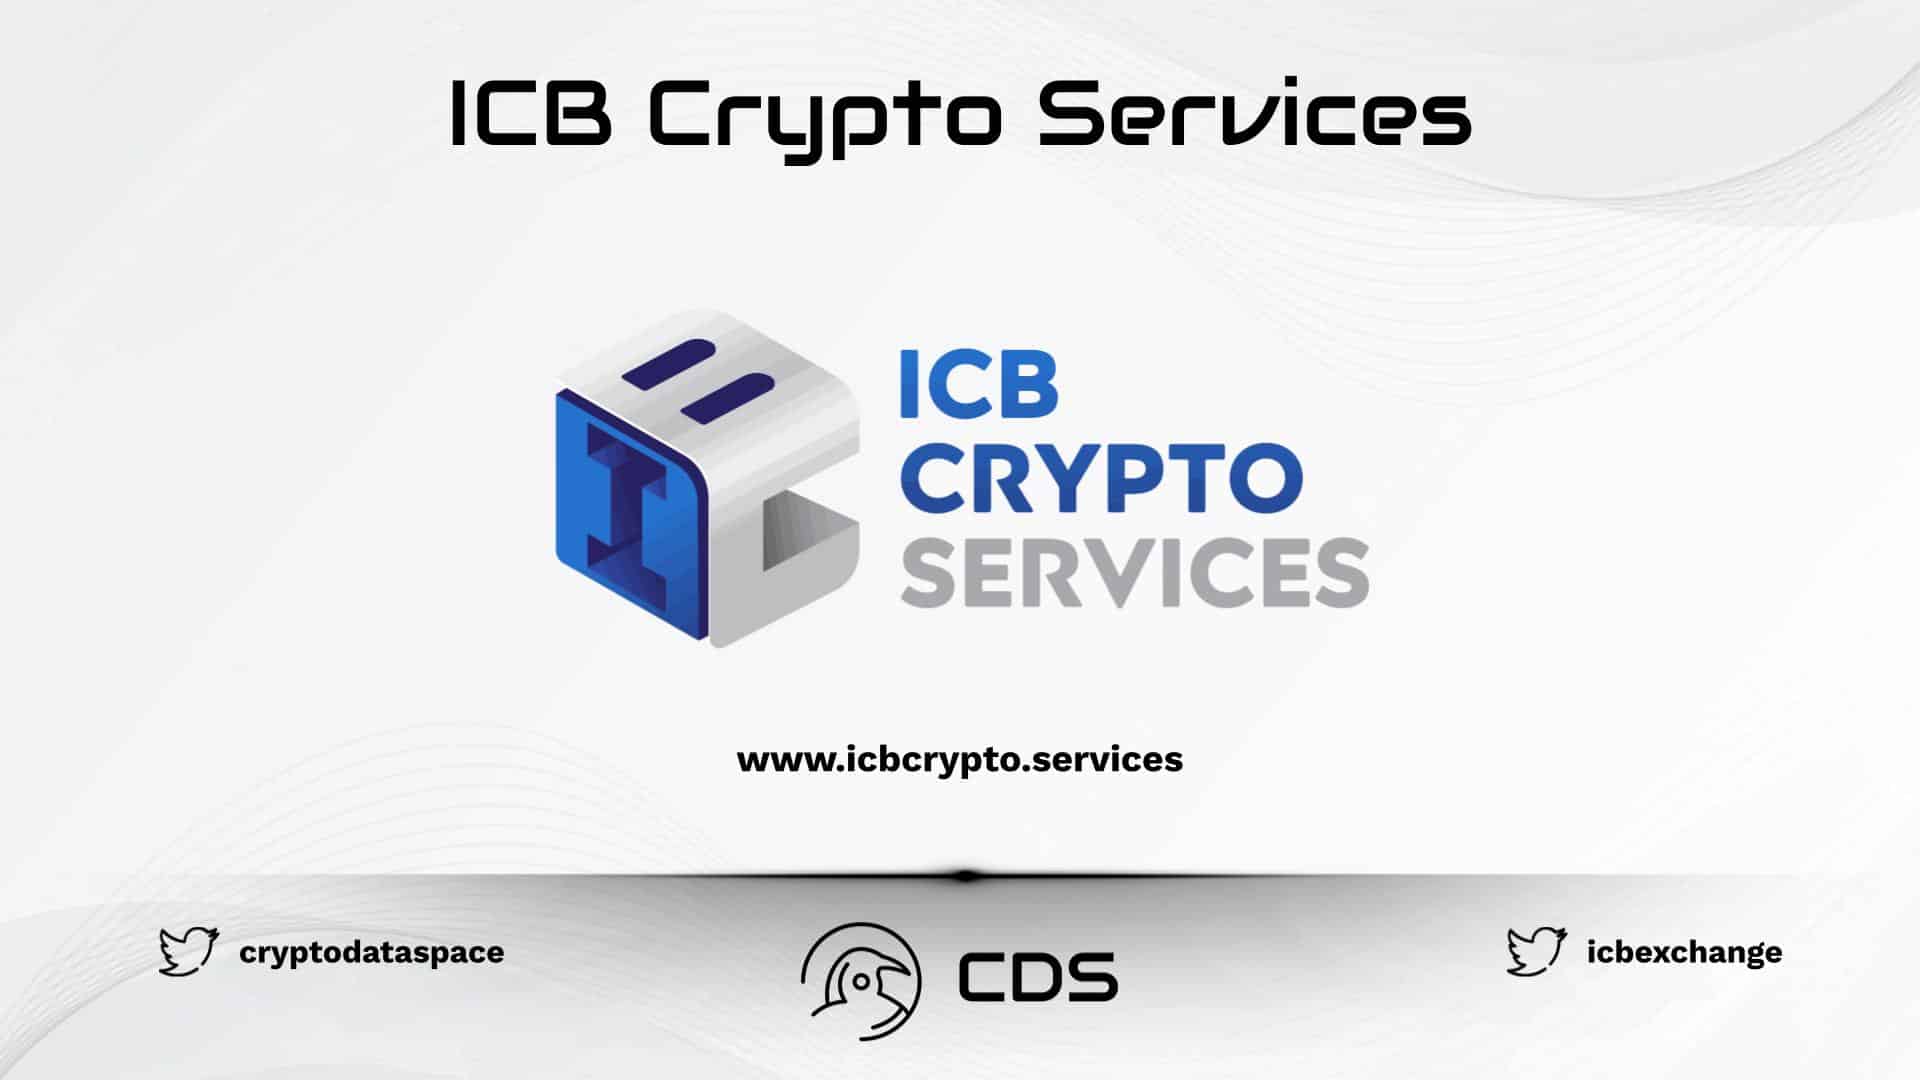 ICB Crypto Services